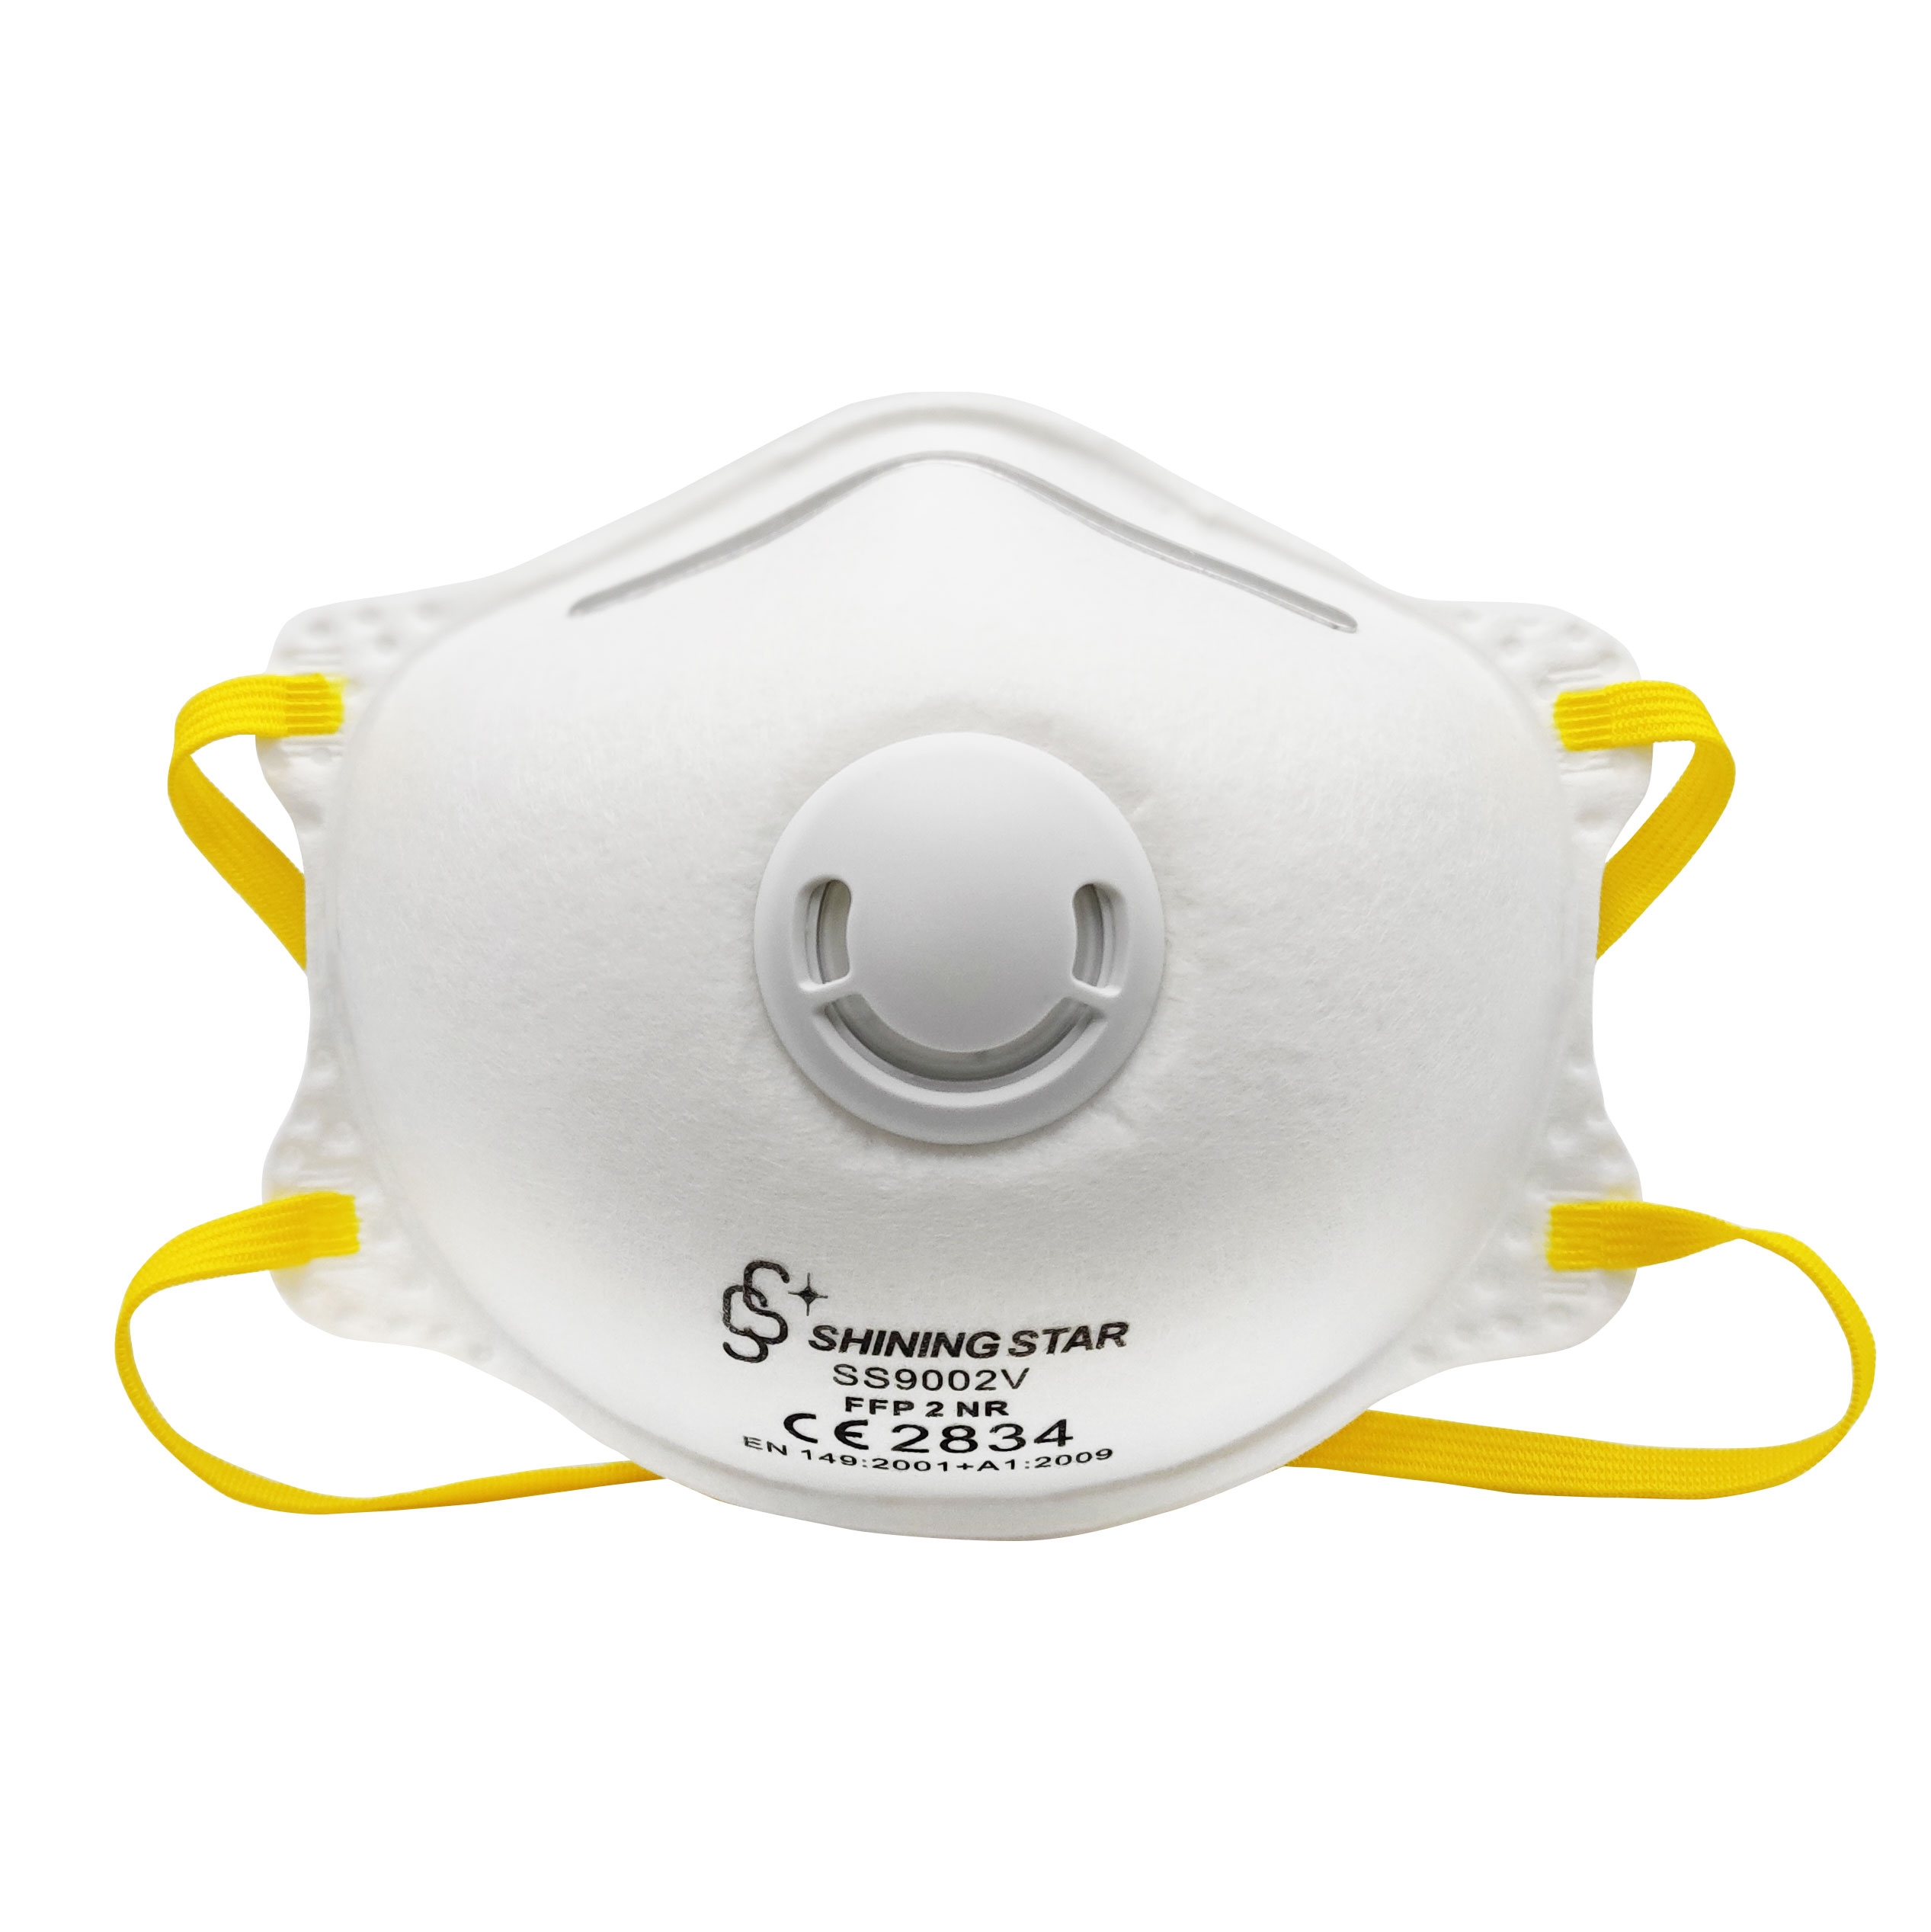 Factory Price For Ffp1 Masks –  SS9002V-FFP2 Disposable Particulate Respirator – Shining Star